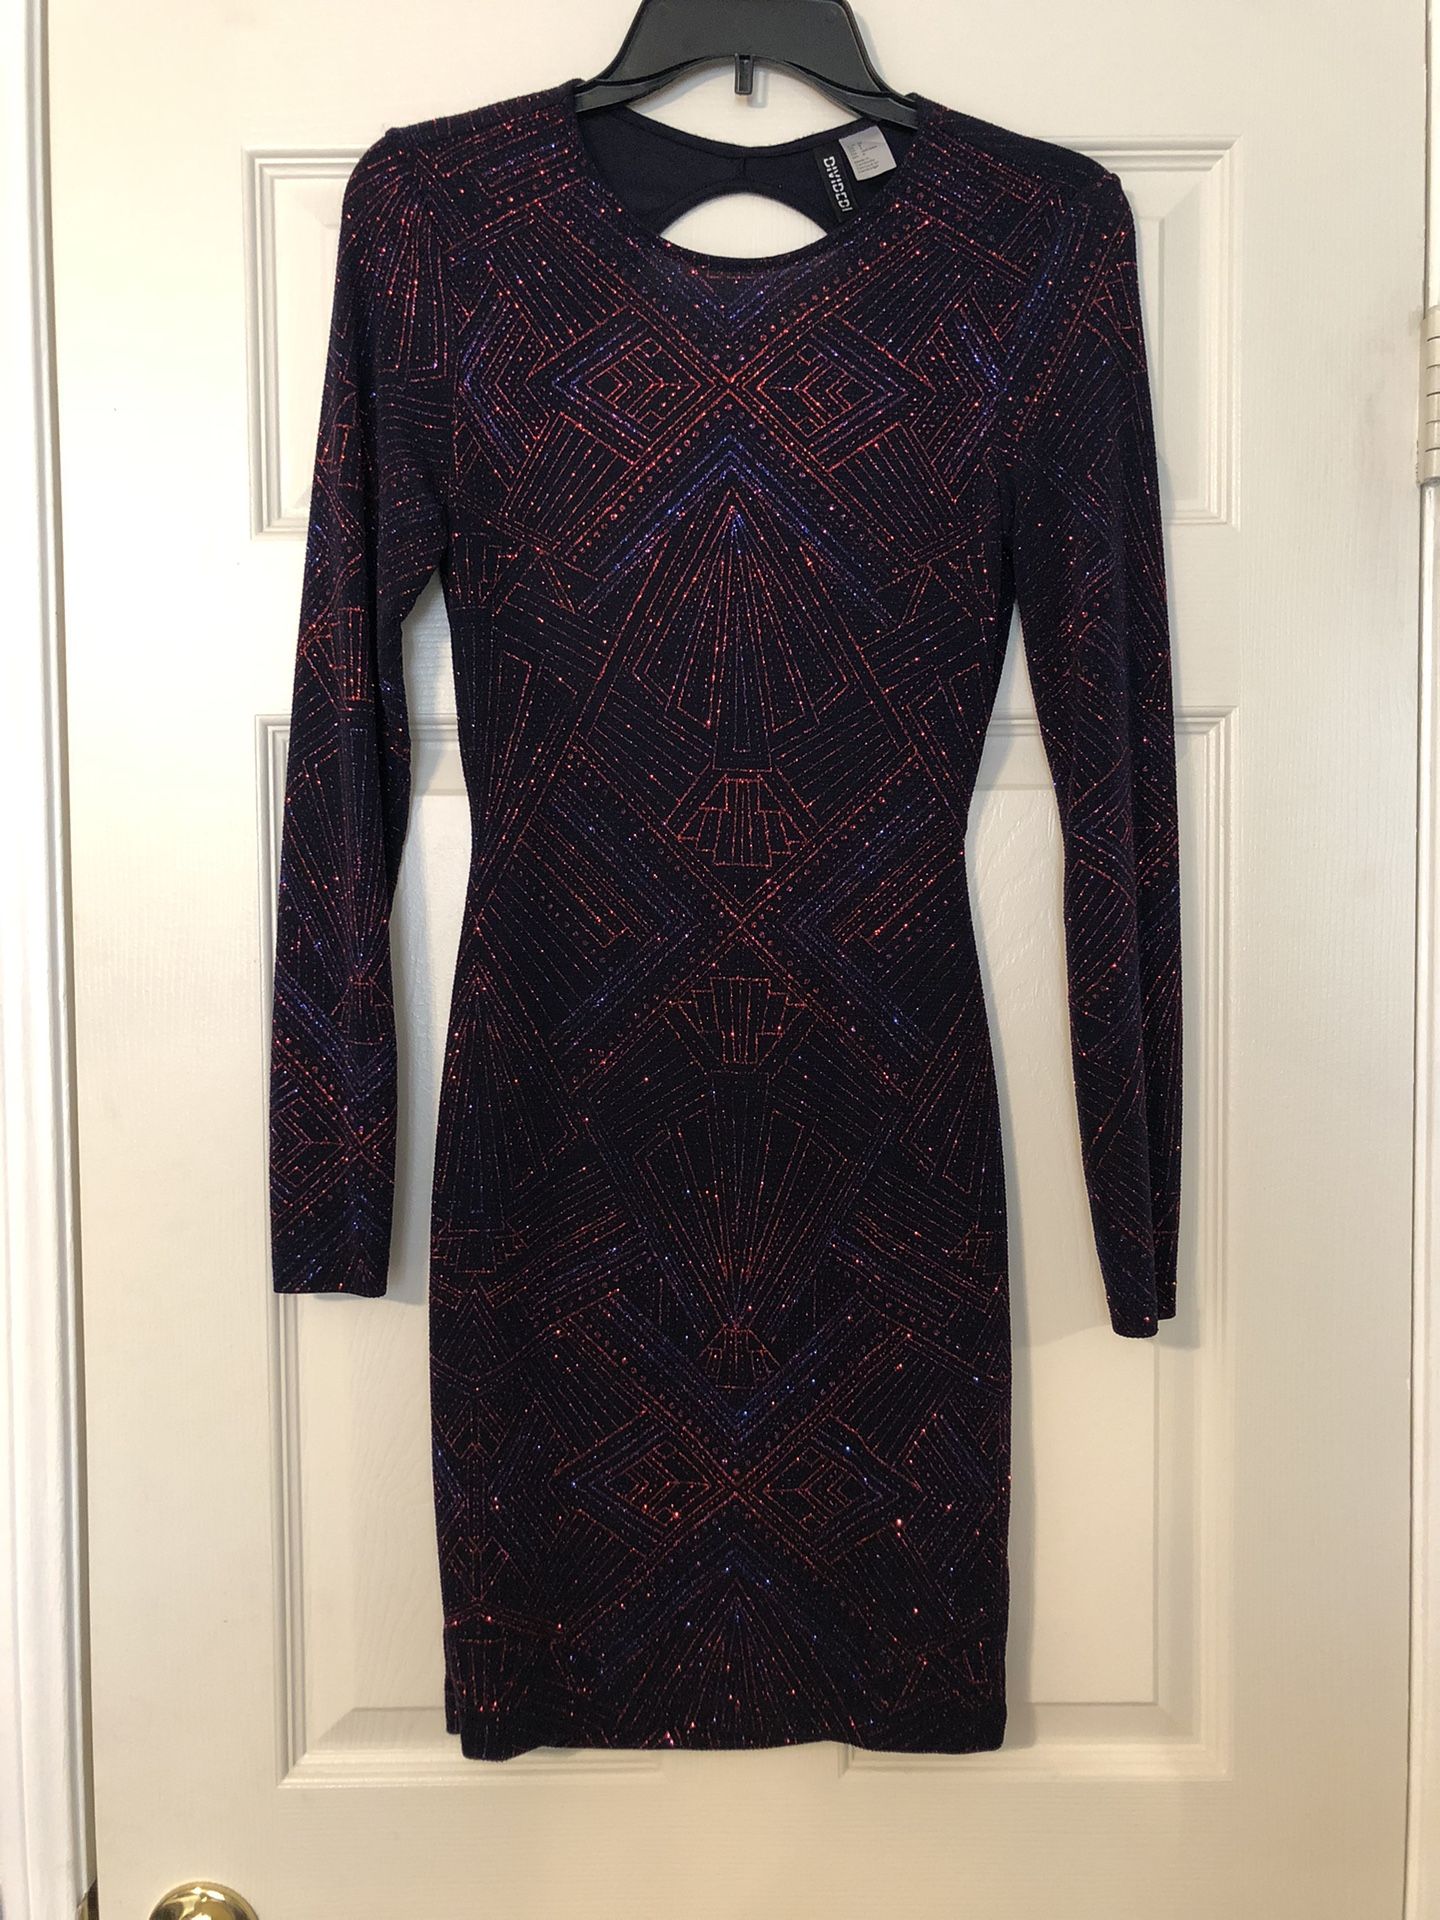 Women’s Divided H&M  Red,Purple & Black Opened Back Long Sleeve Dress Size 6